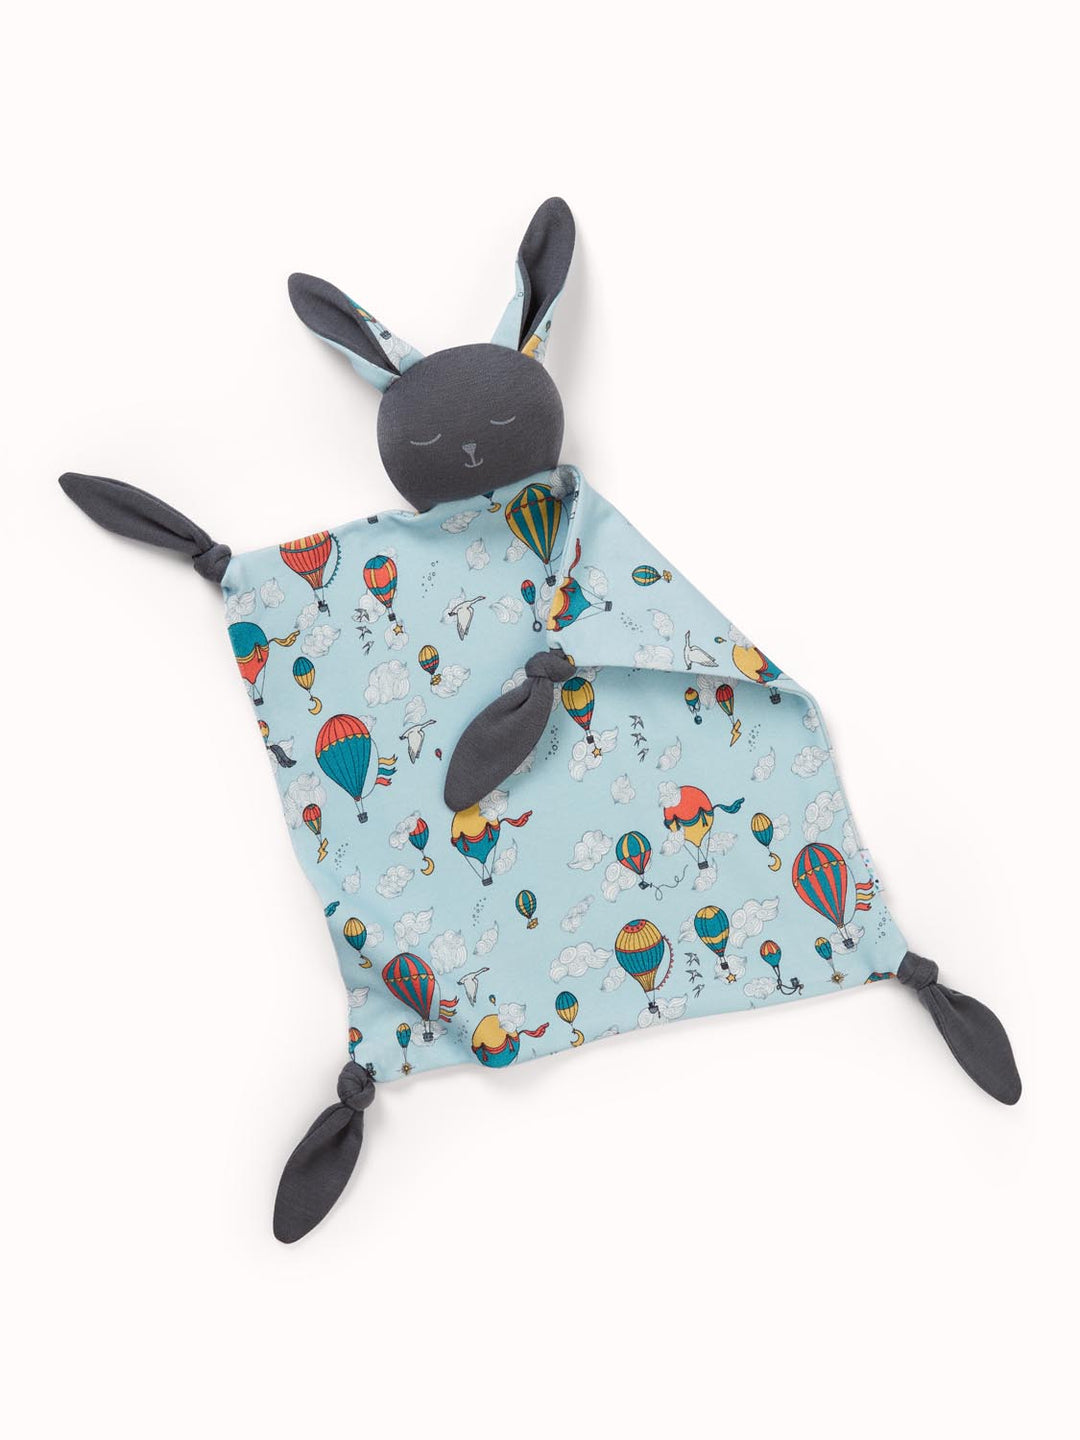 Imperfect Cuddle Bunny Comforter Imperfect Superlove Outlet Up and Away